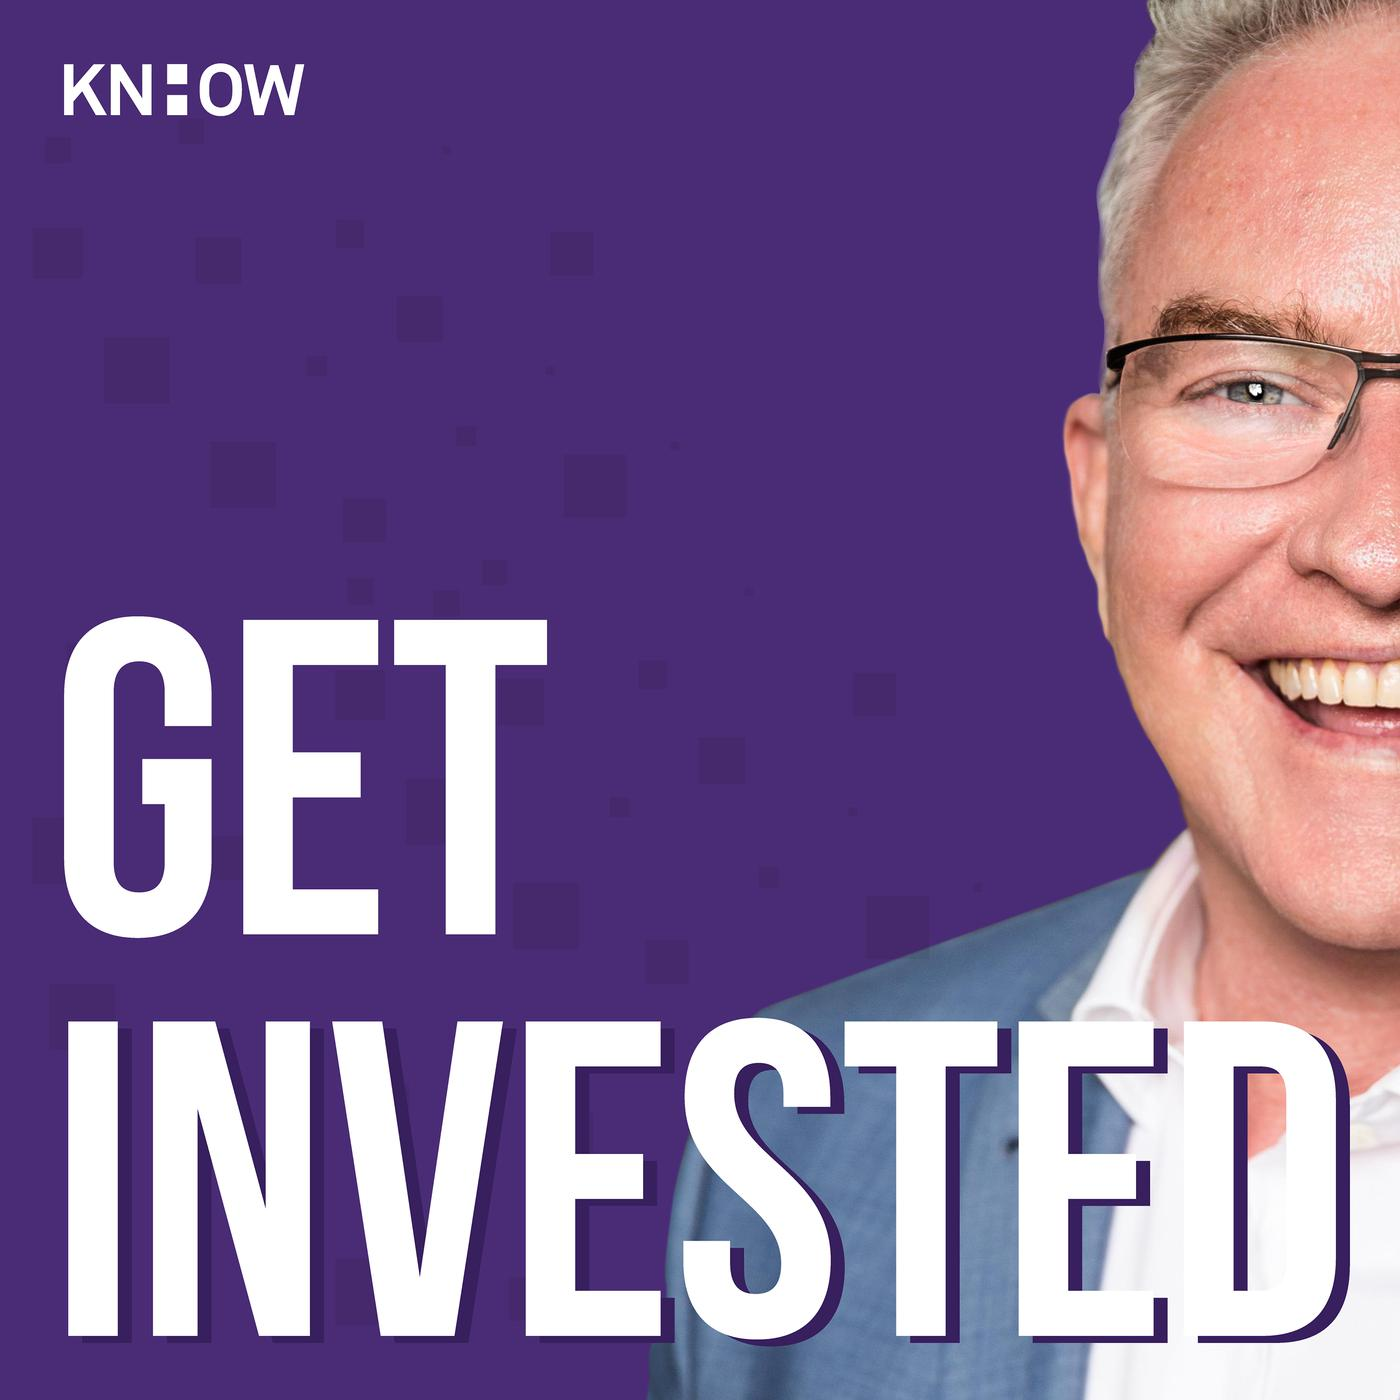 Get Invested: Mark Reid on investing in transformational change